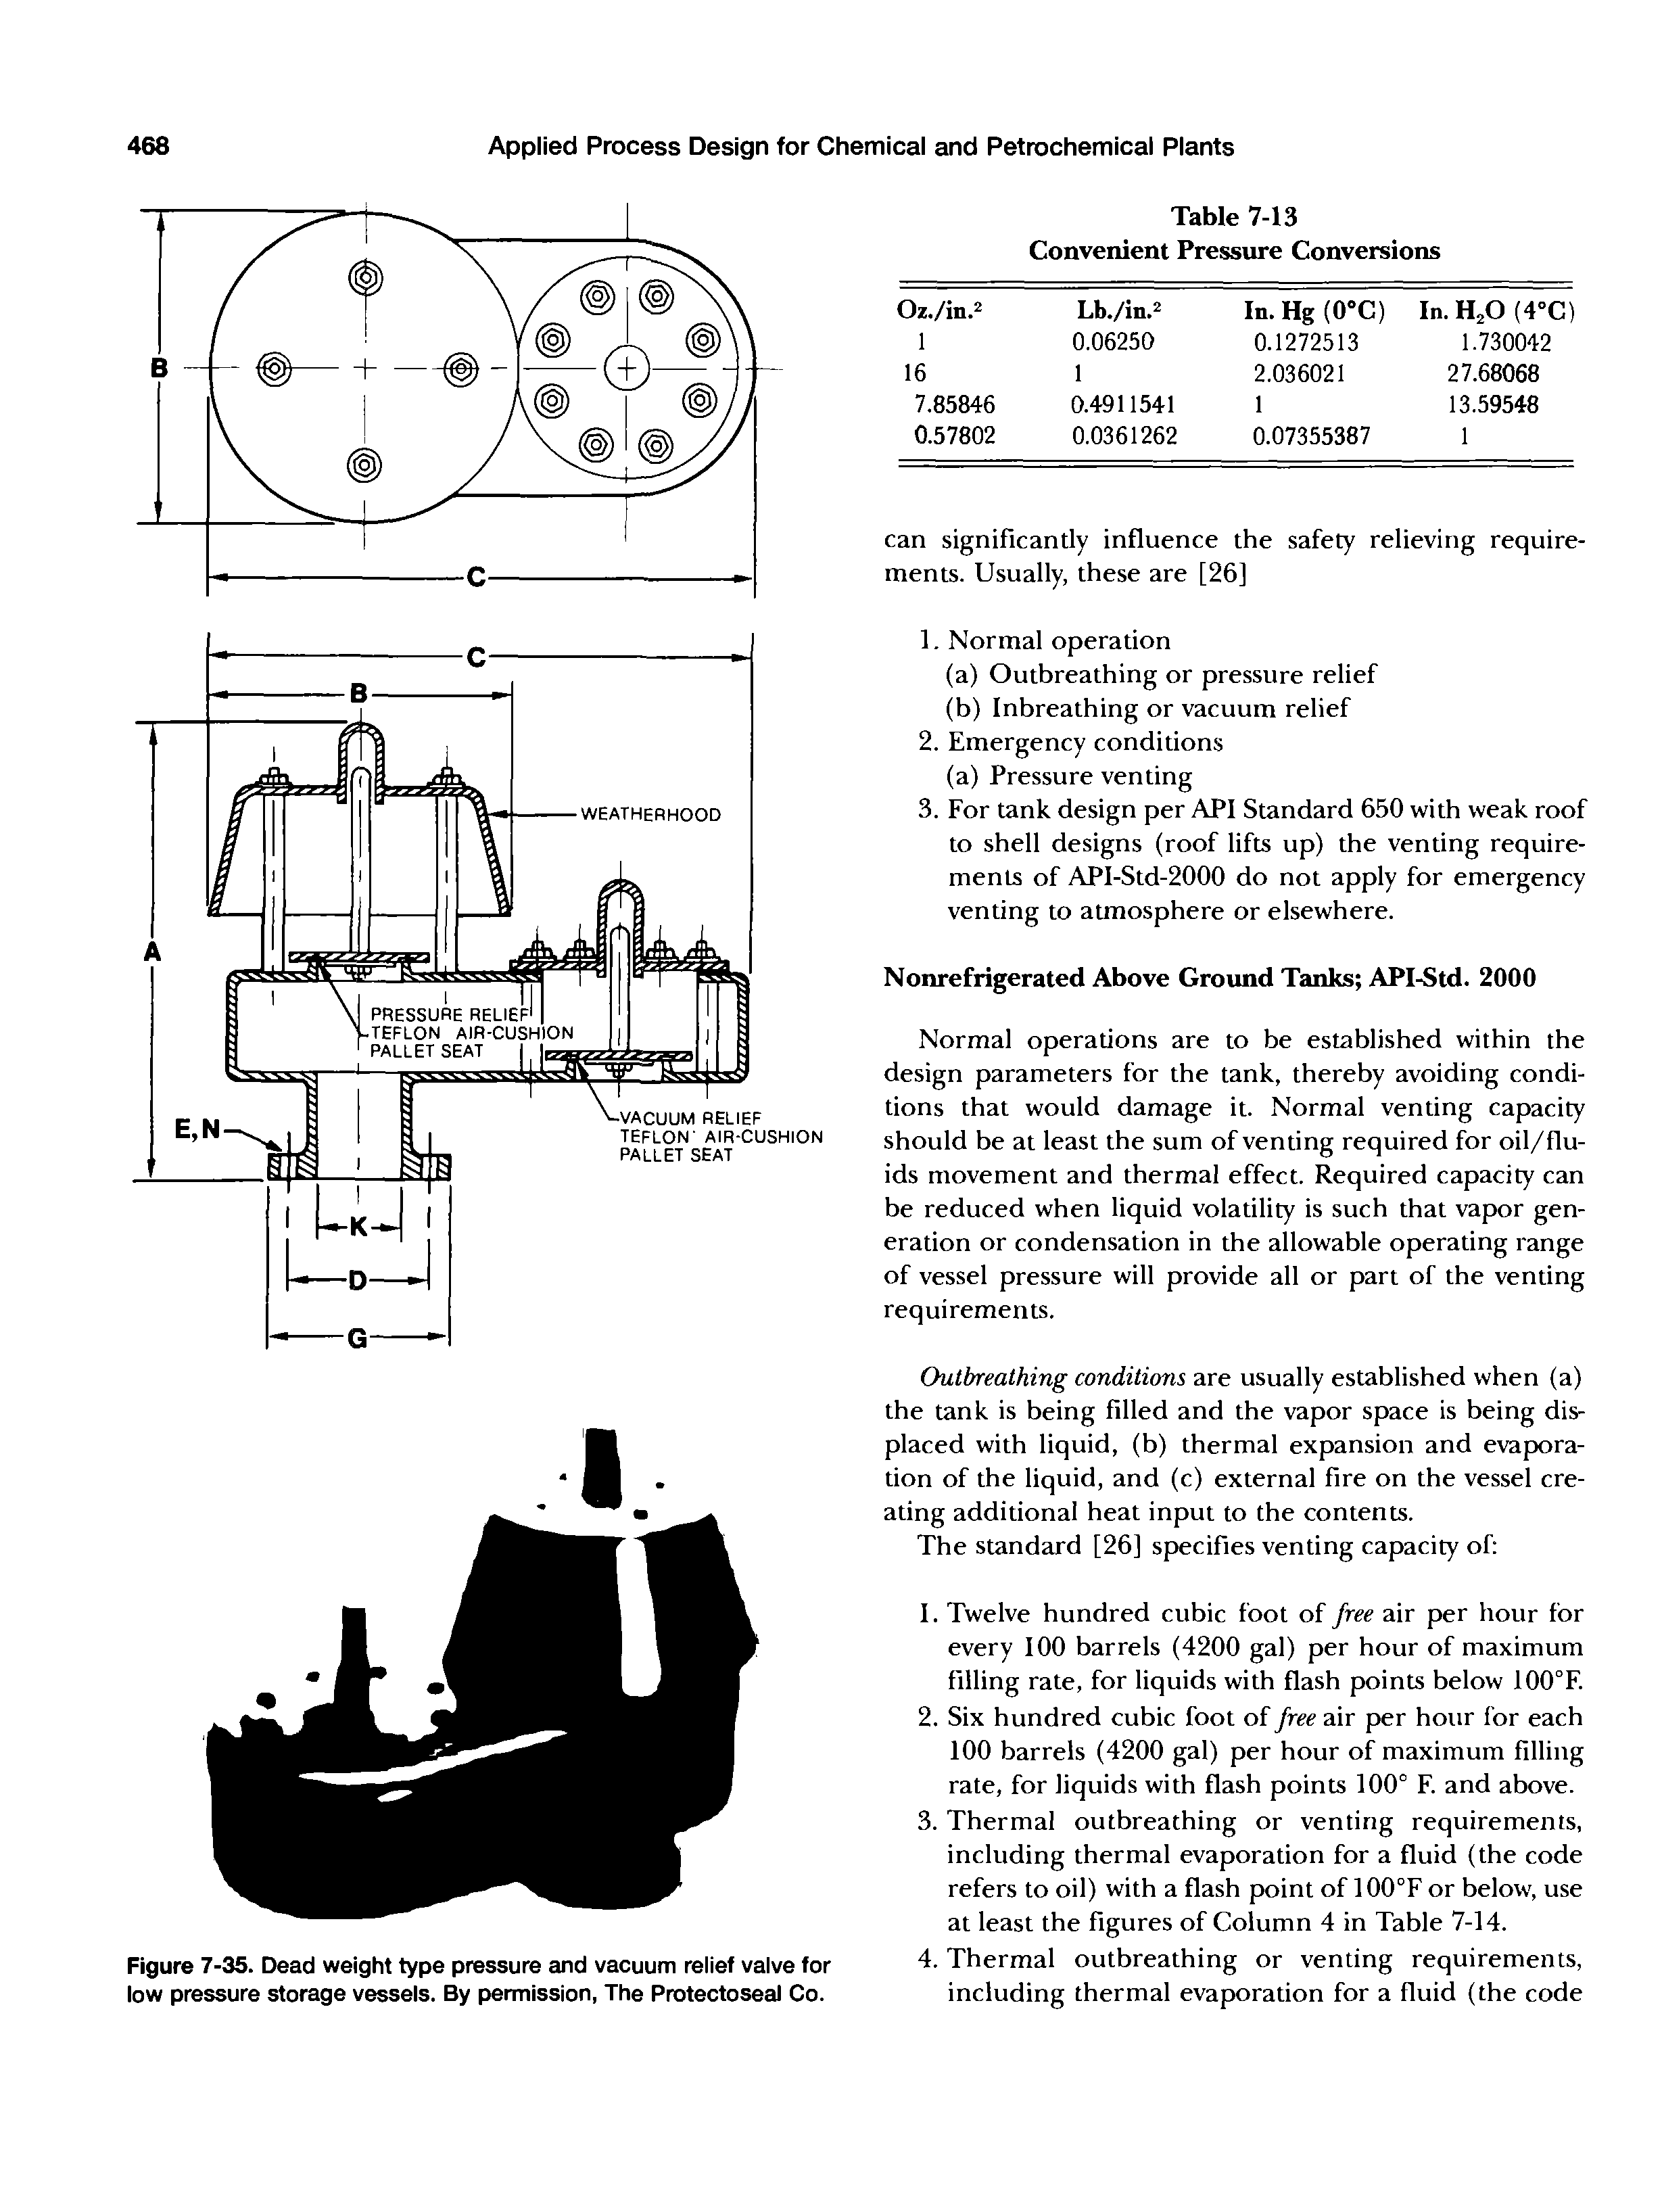 Figure 7-35. Dead weight type pressure and vacuum relief valve for low pressure storage vessels. By permission, The Protectoseal Co.